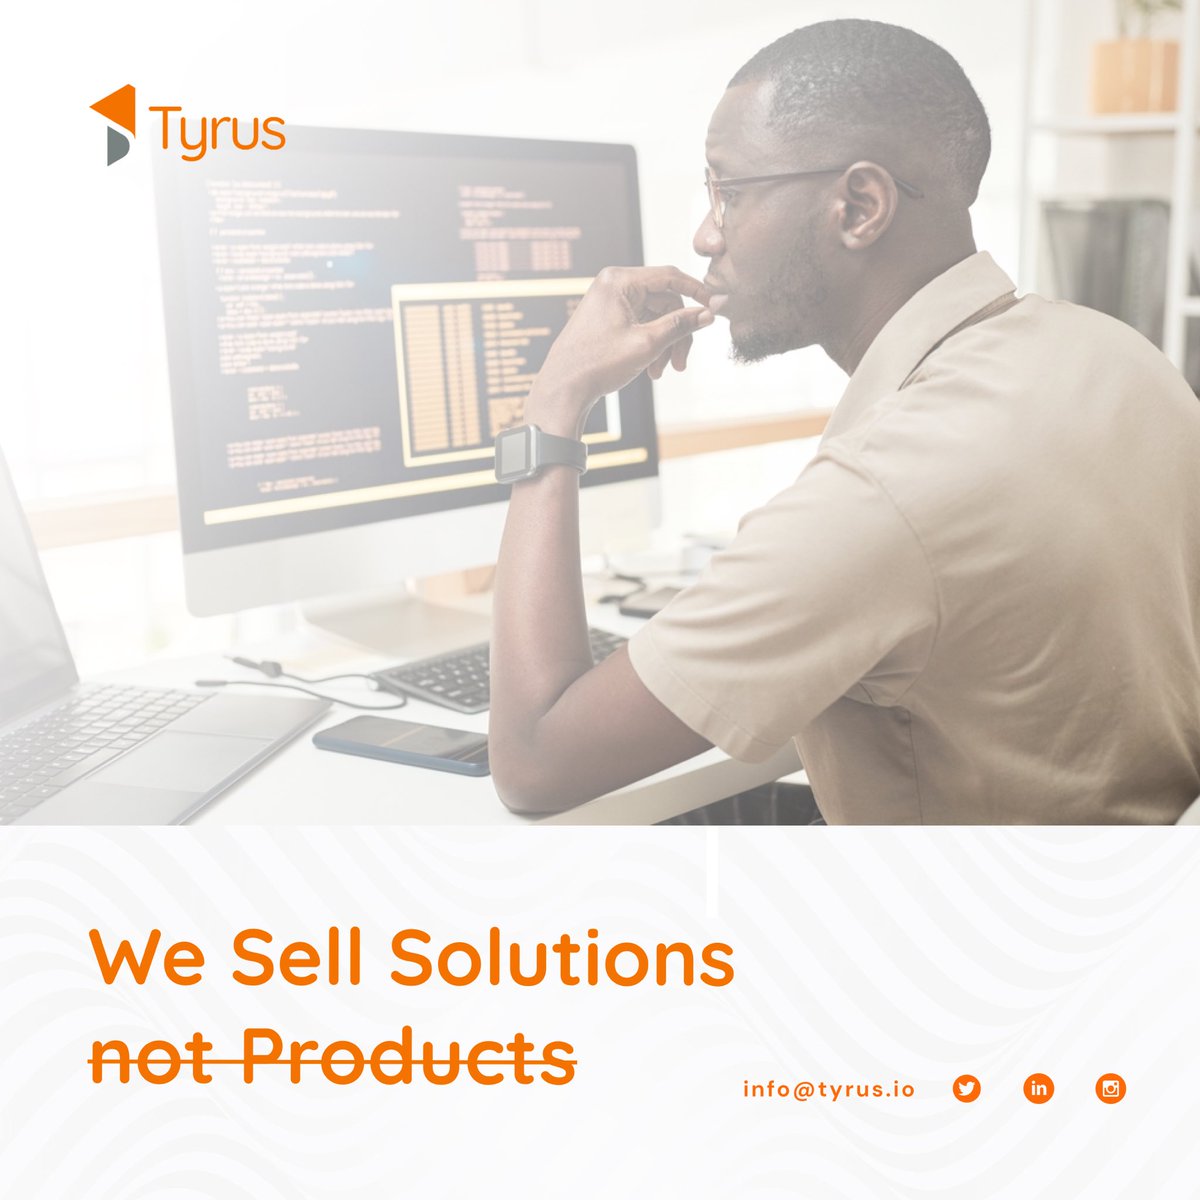 We don’t just sell the products, we empower businesses with our tailored software solutions. 

Now is the time for enhanced productivity. Let’s help you make your operations smooth today!
📧 info@tyrus.io
.
.
#tyrustechnologies #solutionprovider #resultoriented #tailoredsolutions